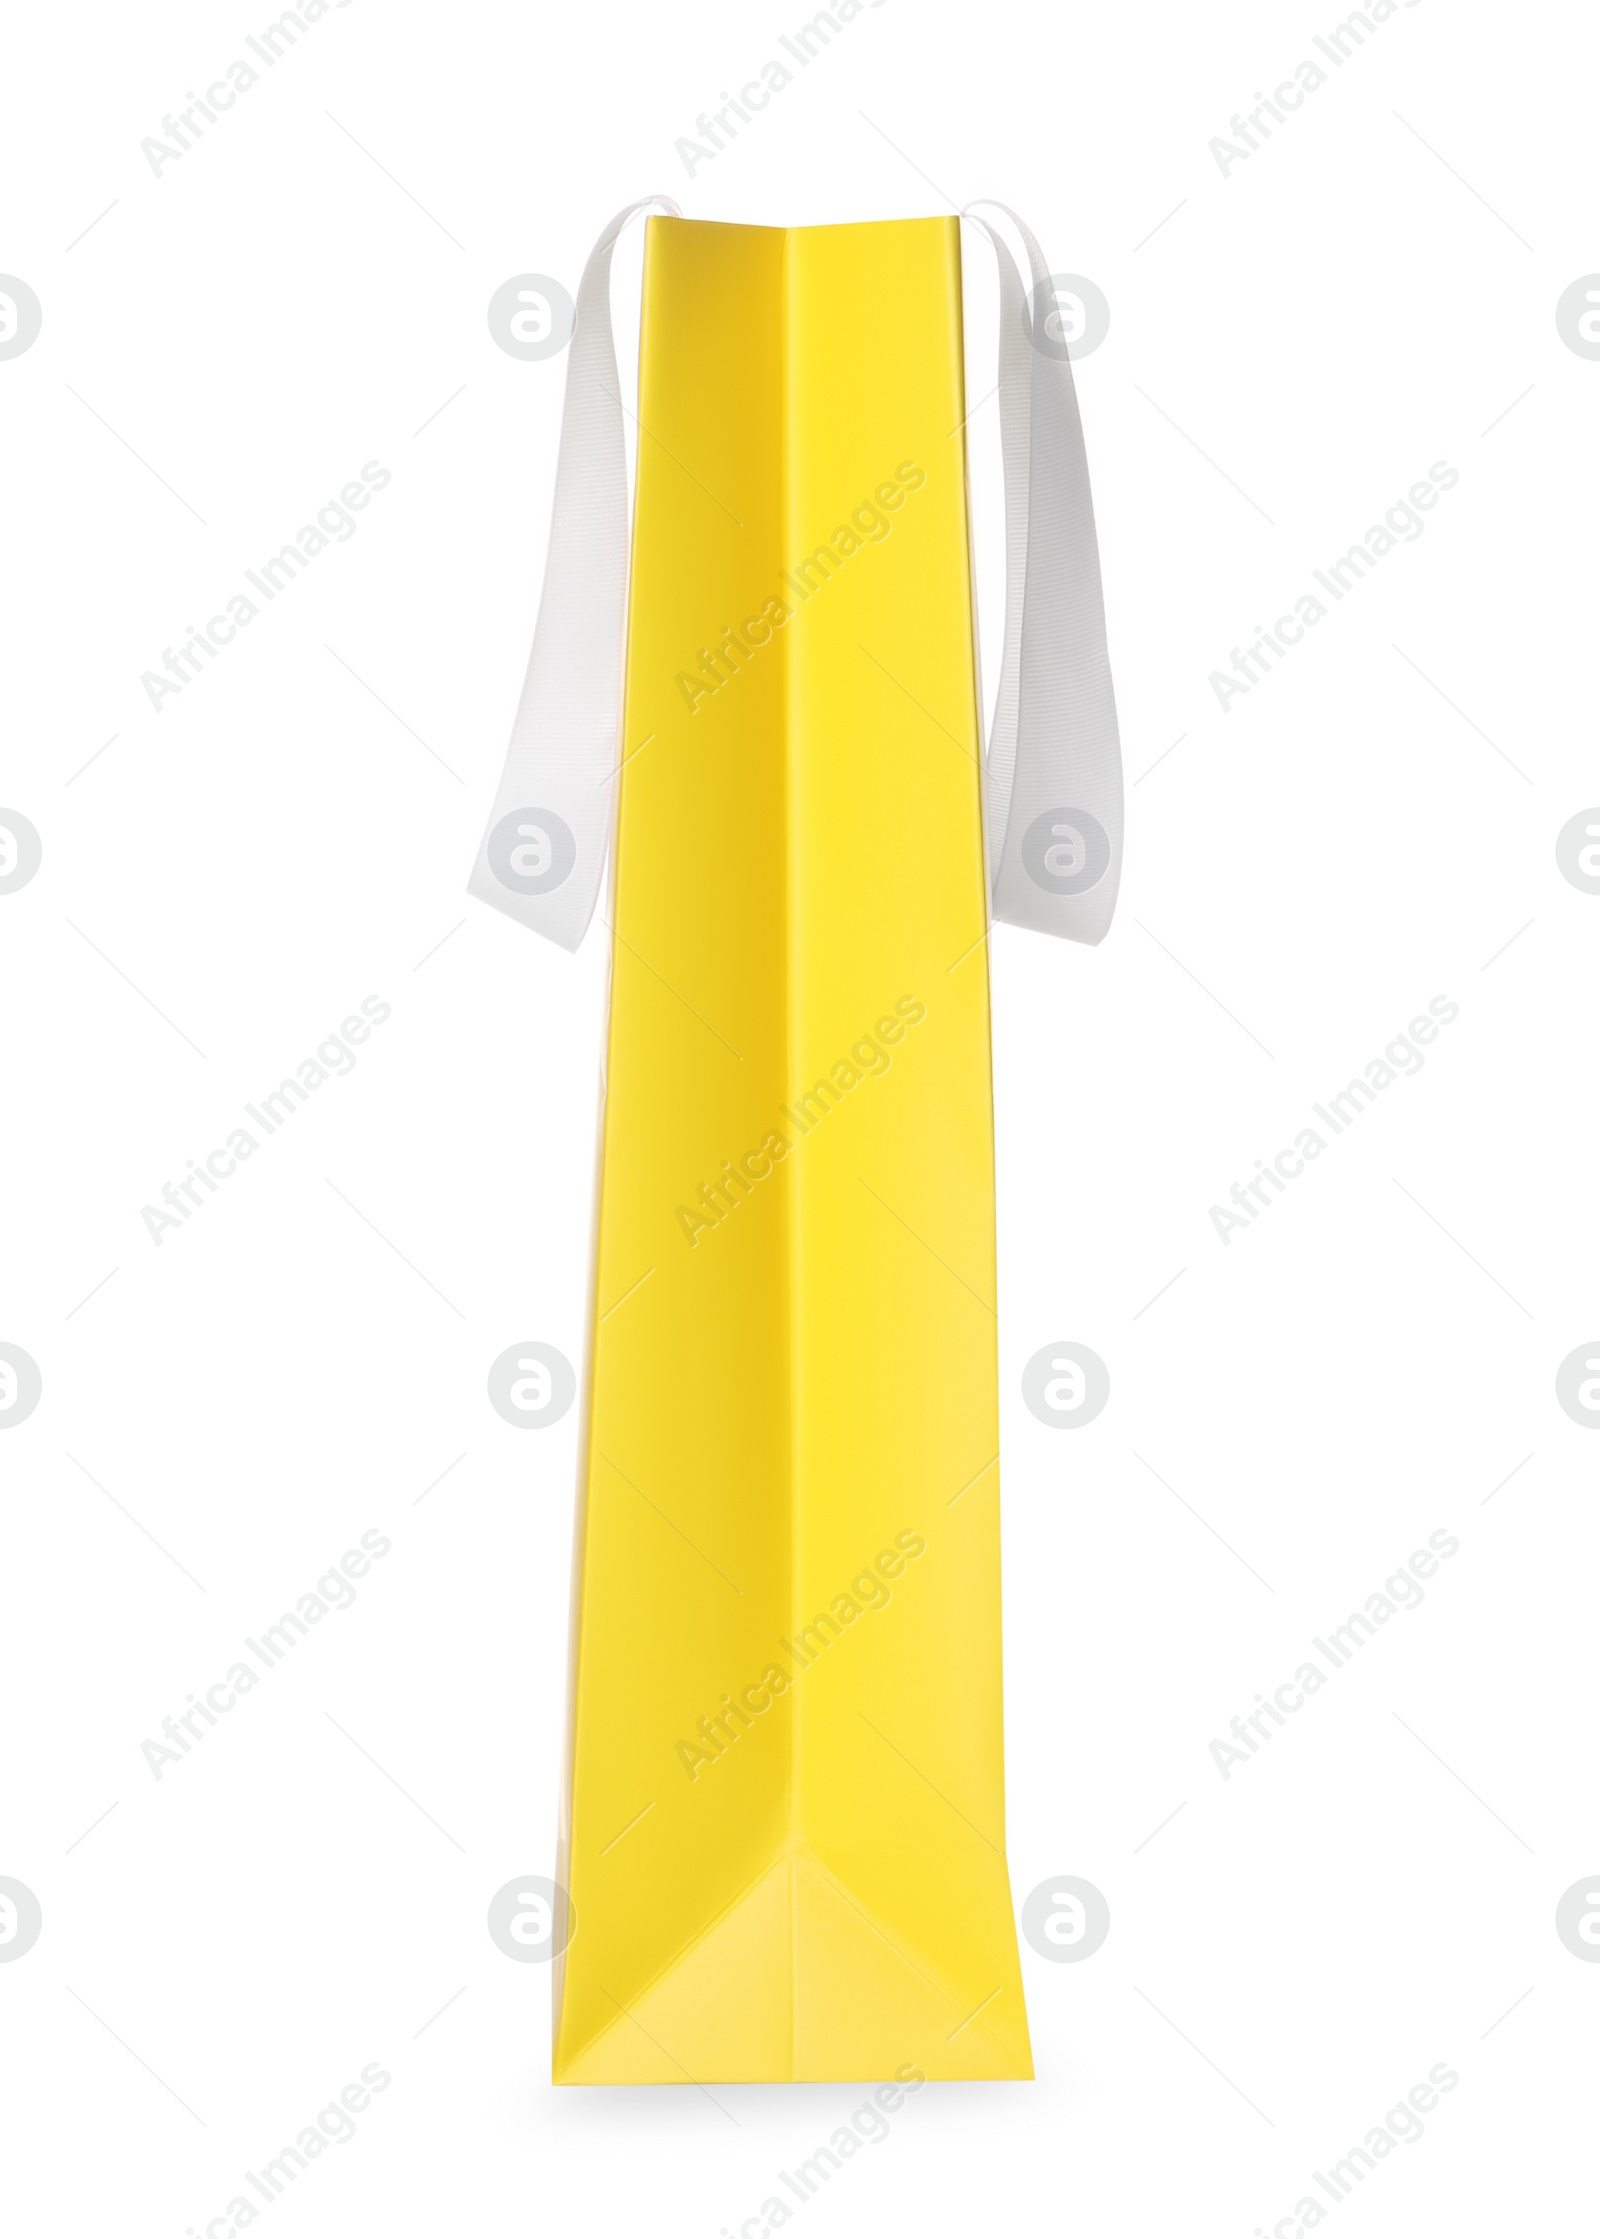 Photo of One yellow shopping bag isolated on white